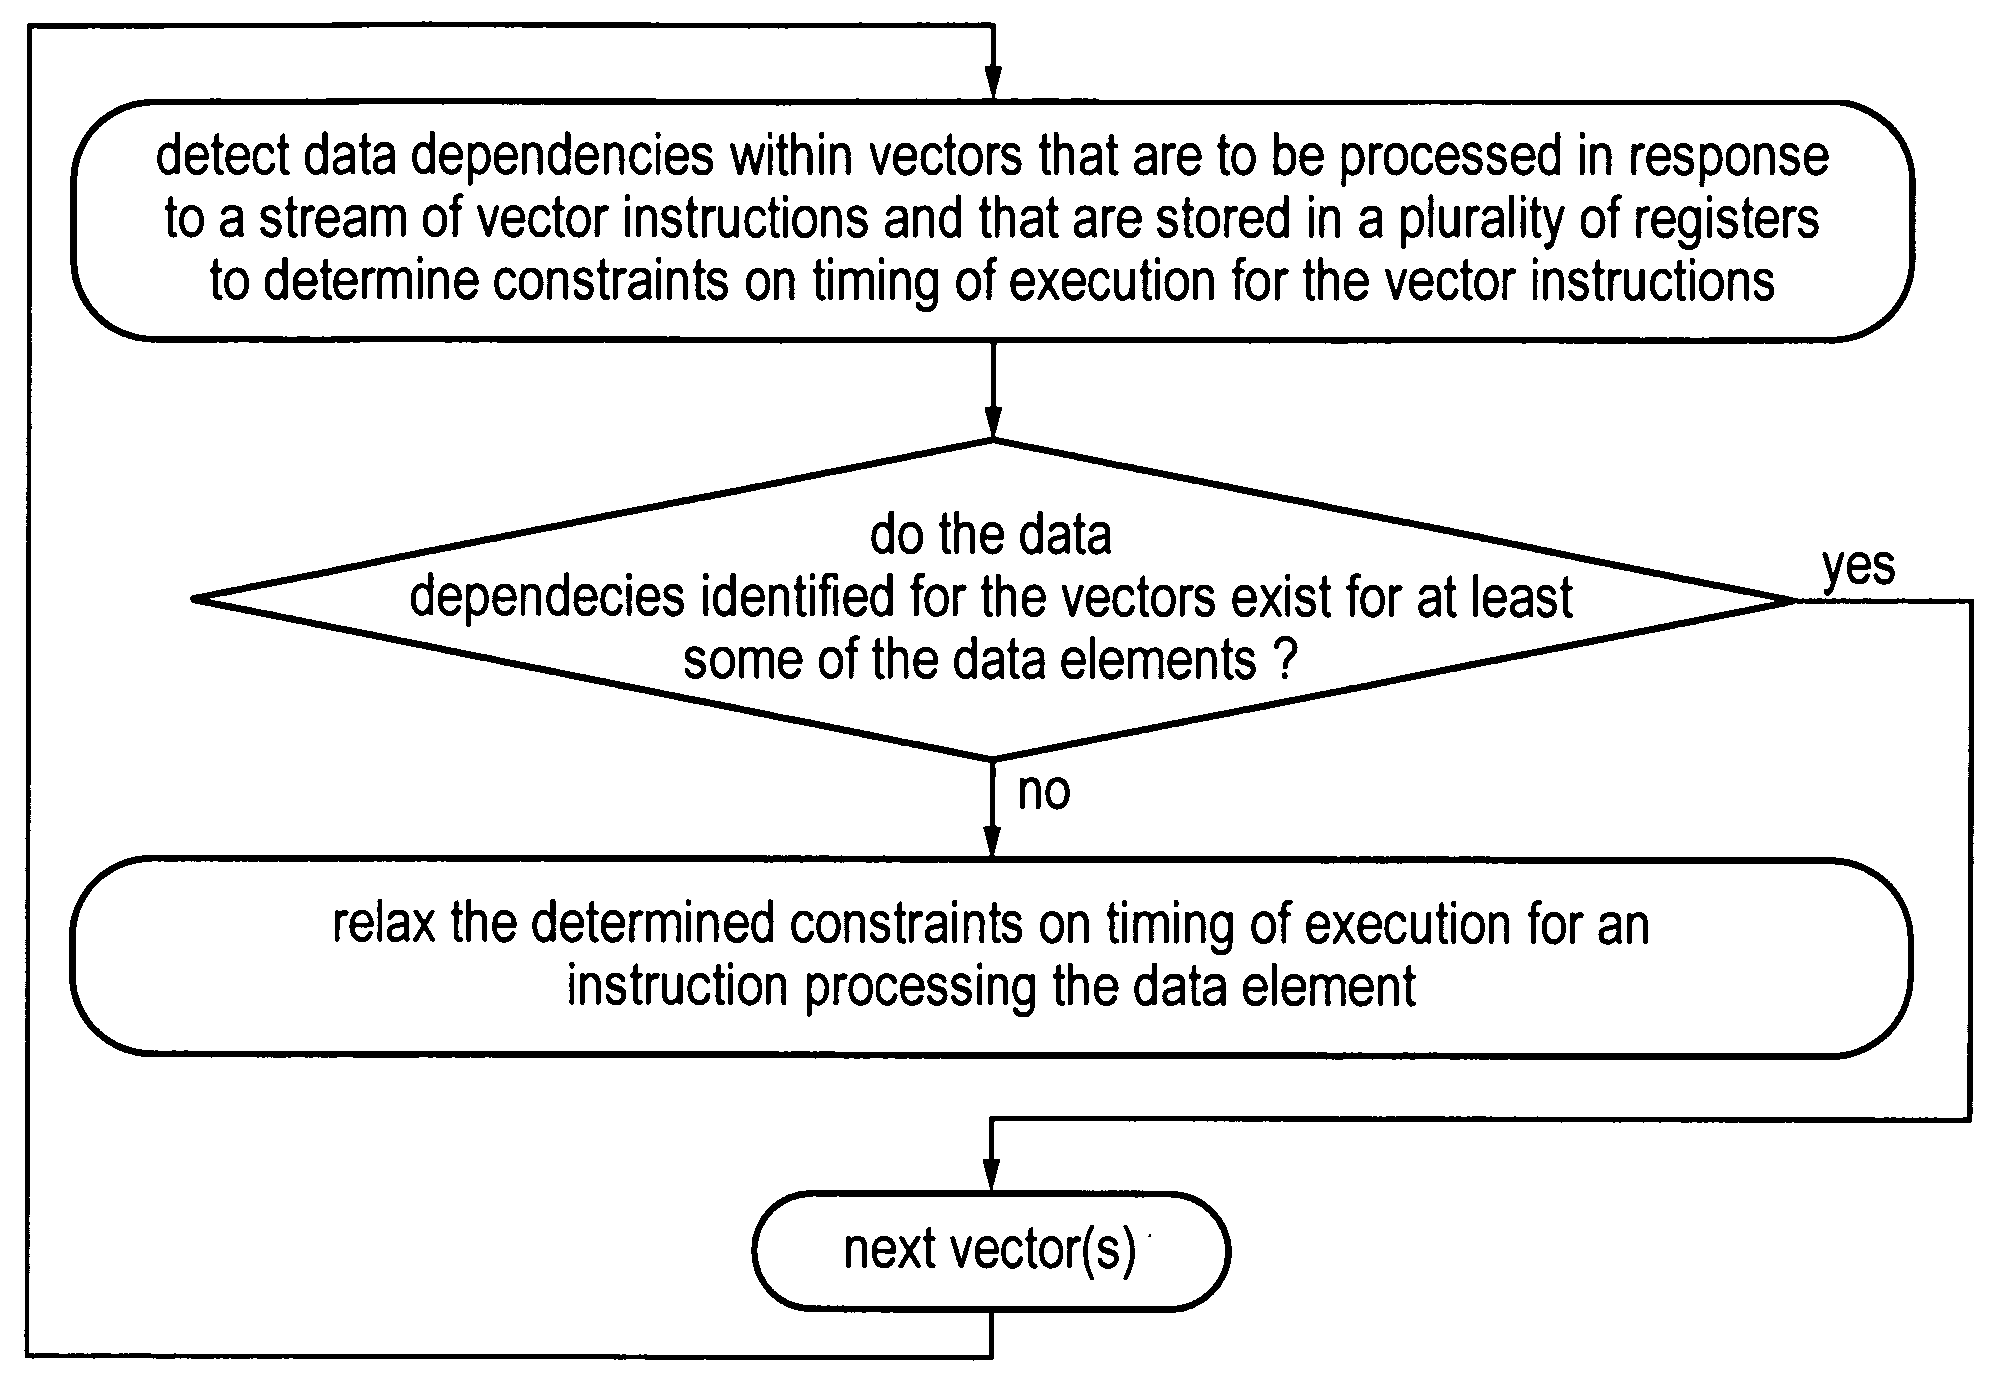 Controlling an order for processing data elements during vector processing